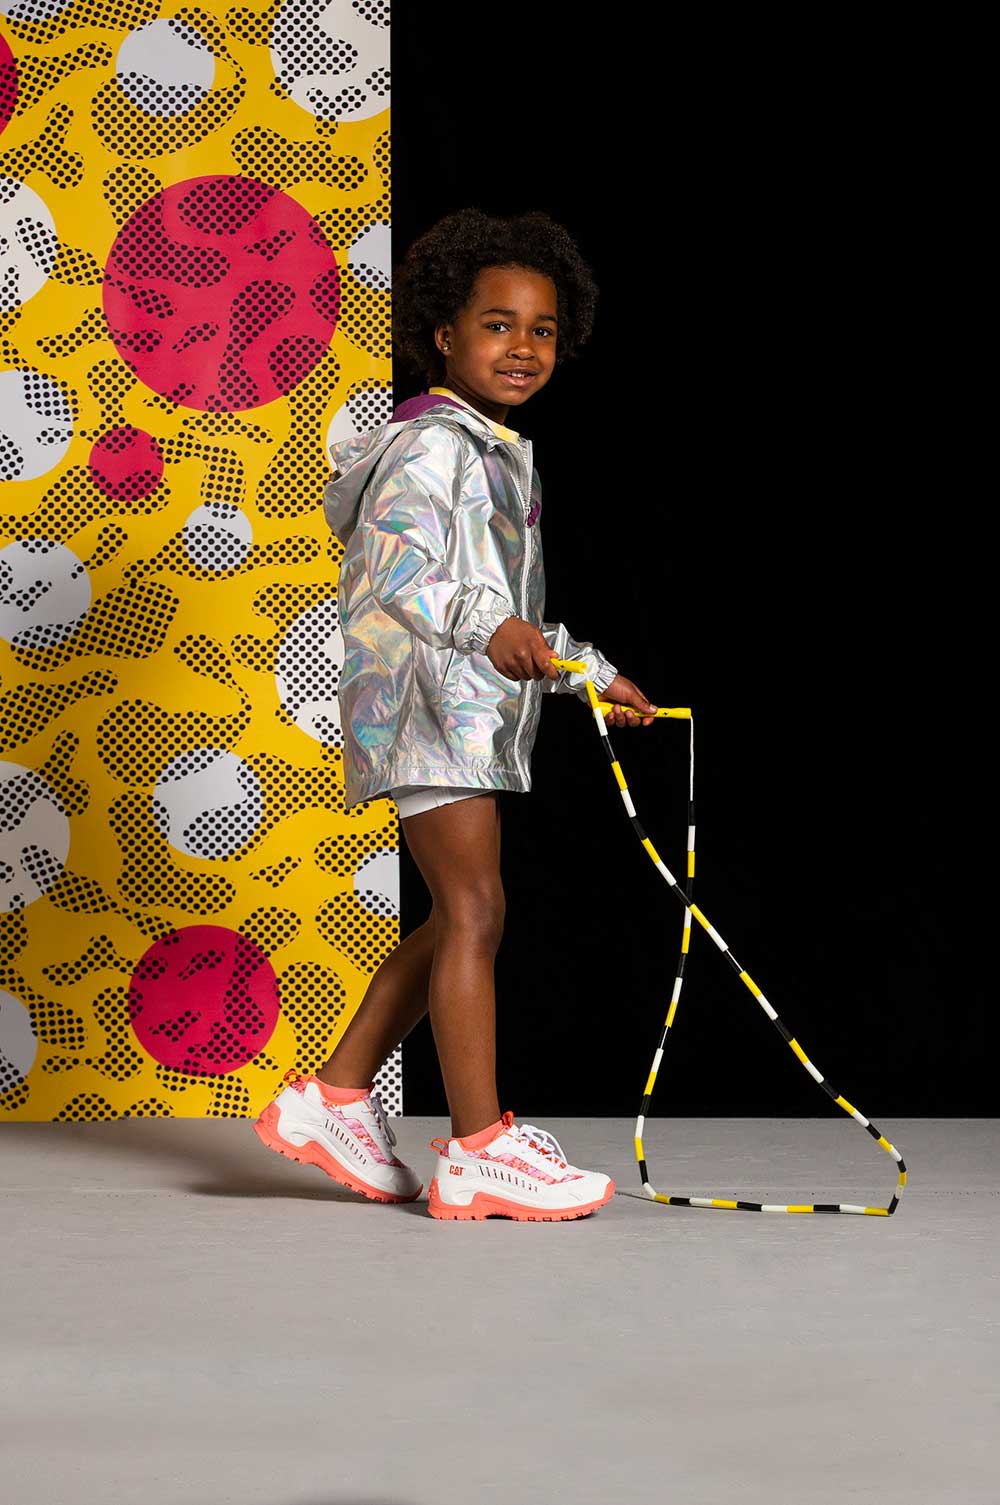 A young girl holding a skipping rope